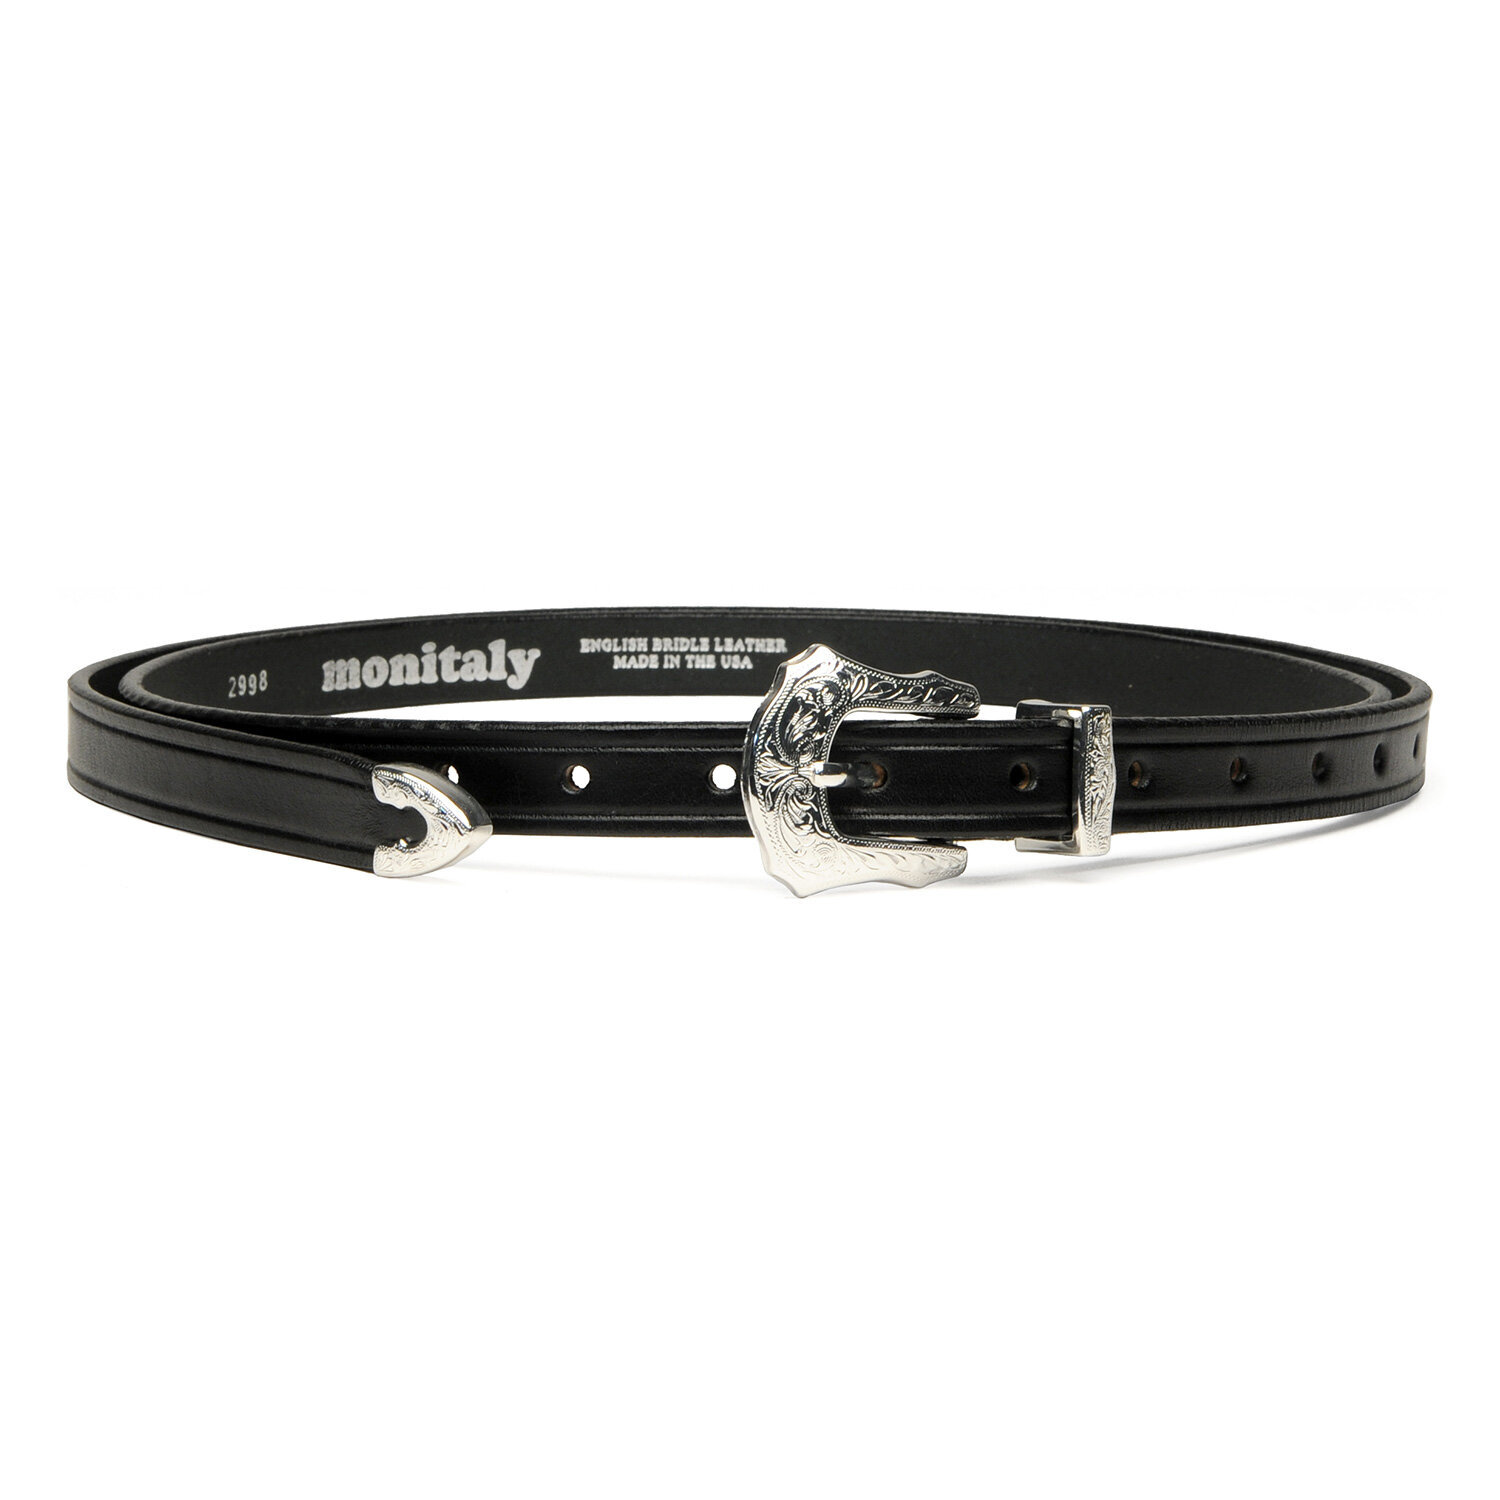 M26903-Extra-Long-Leather-Belt-with-3-pc-Silver-Buckle-Set,-Black.jpg